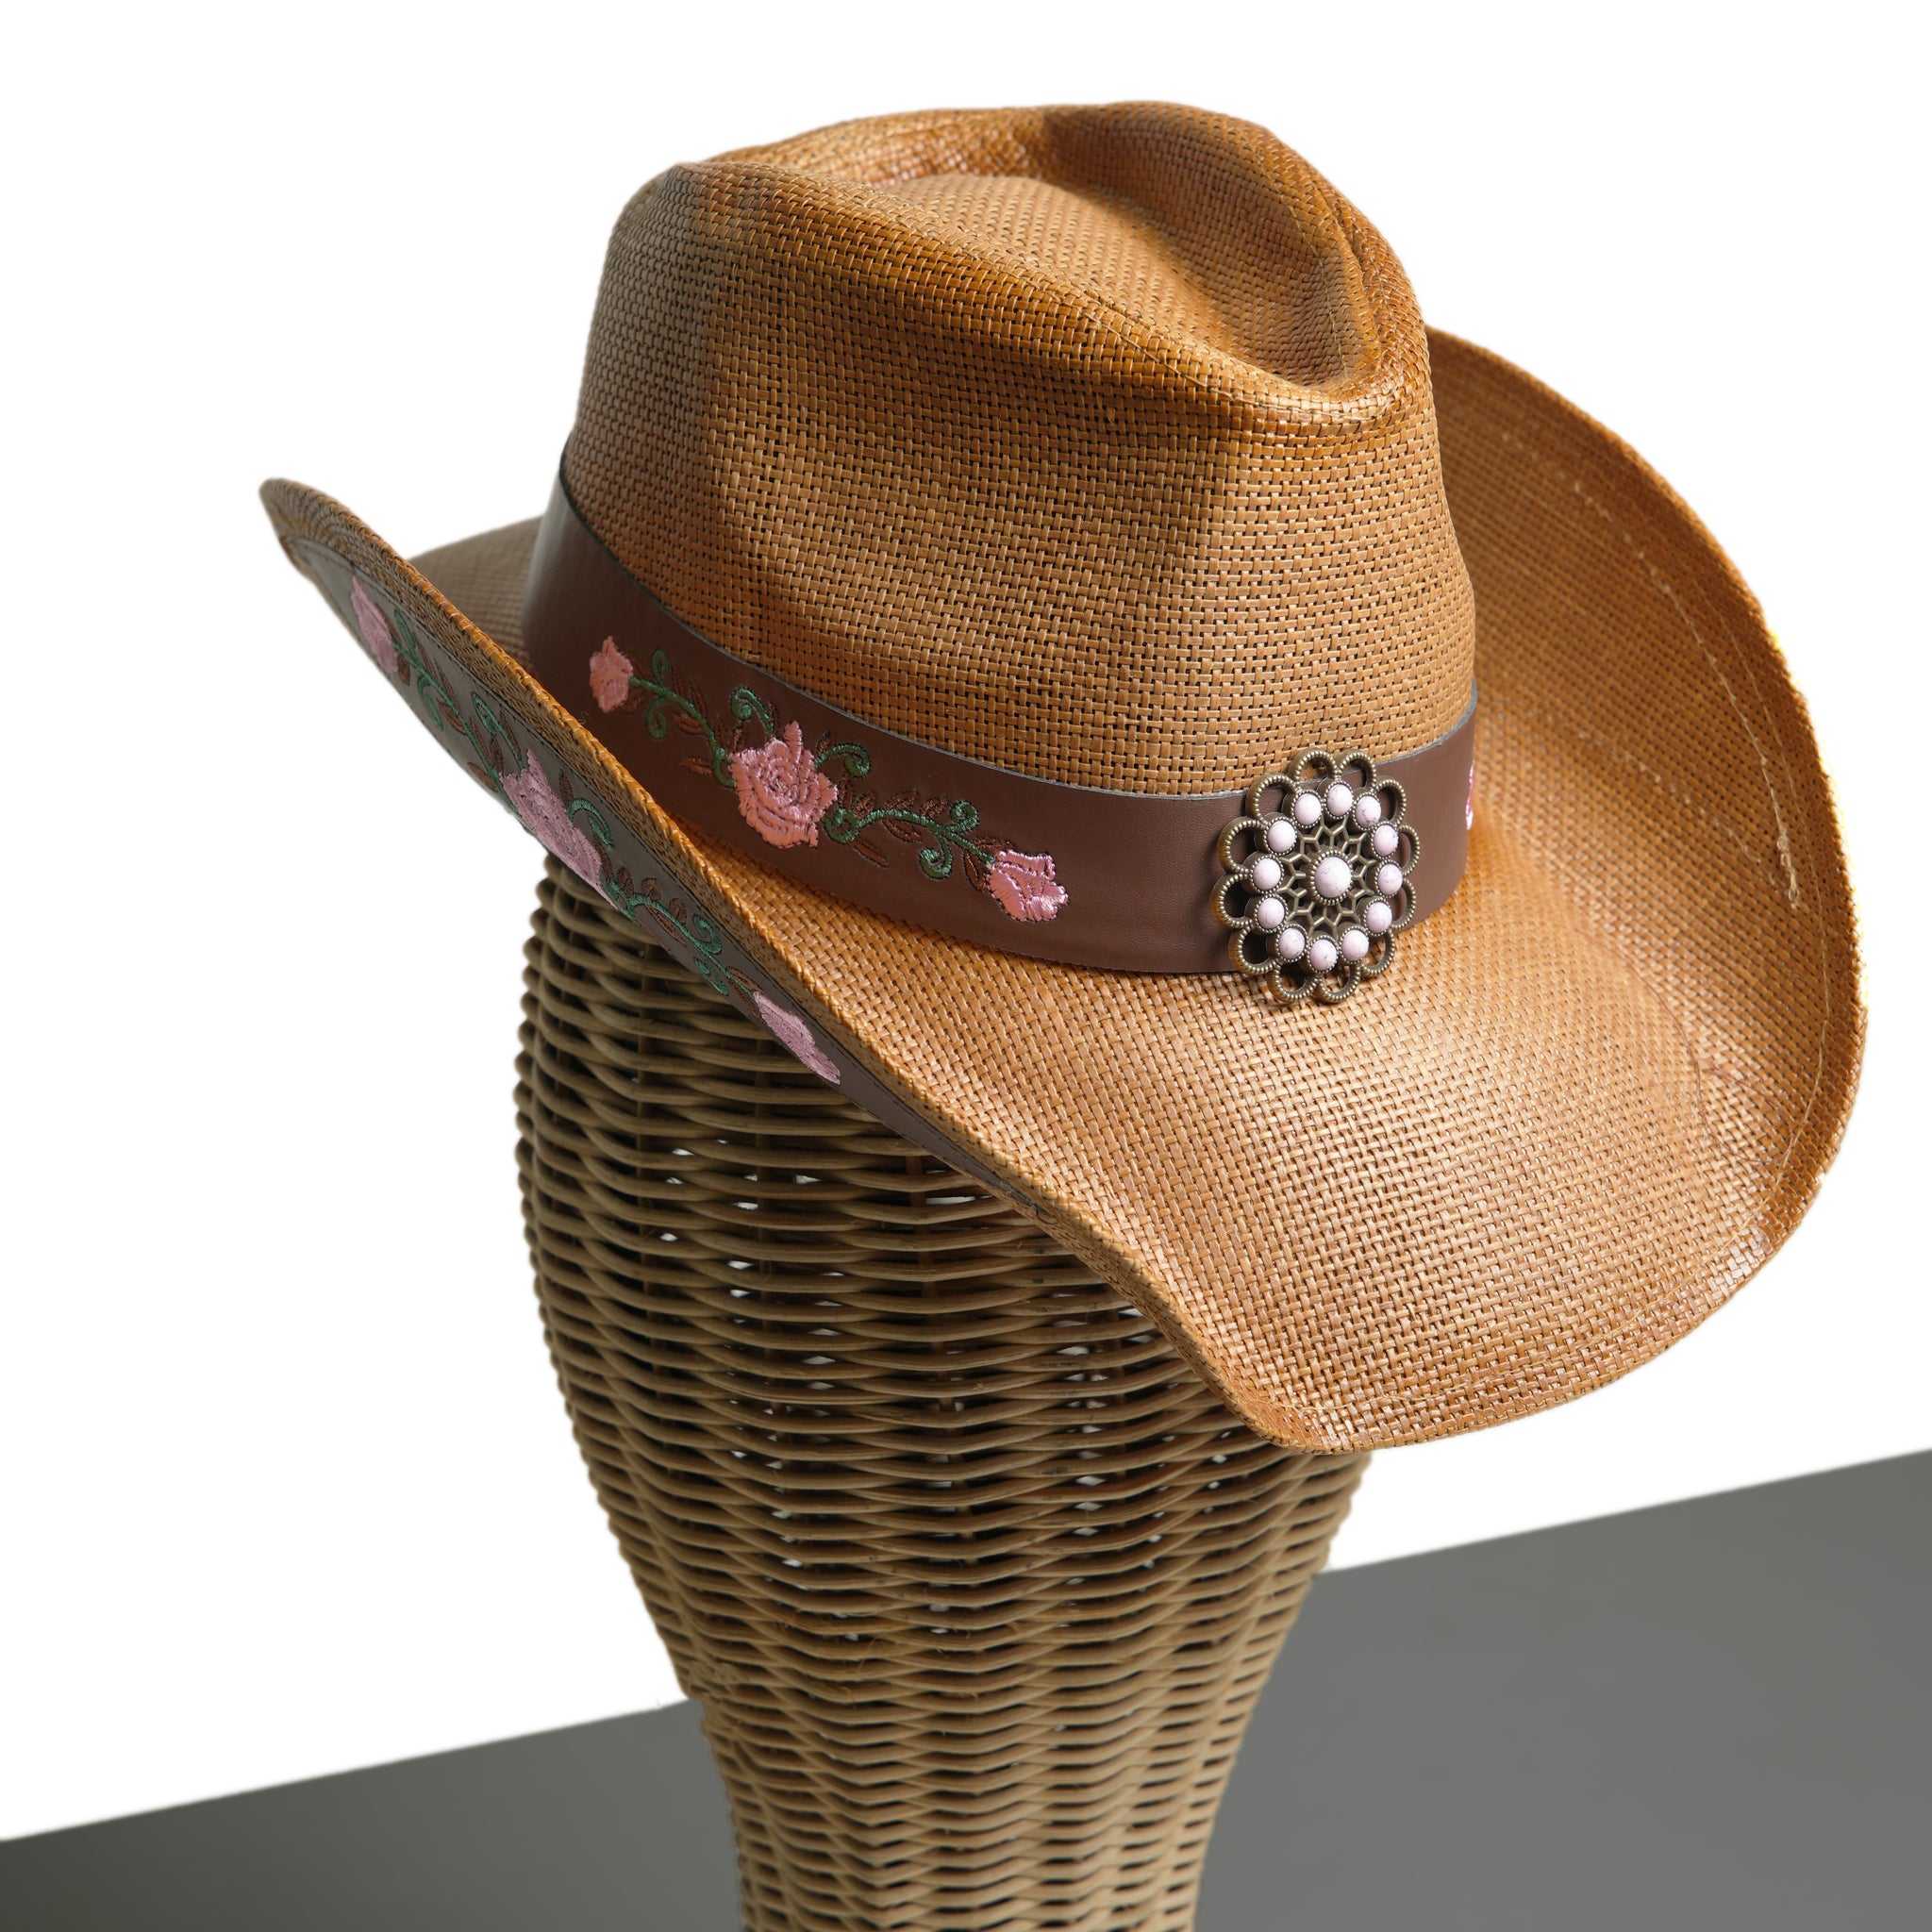 Straw Hats for Men Online in India